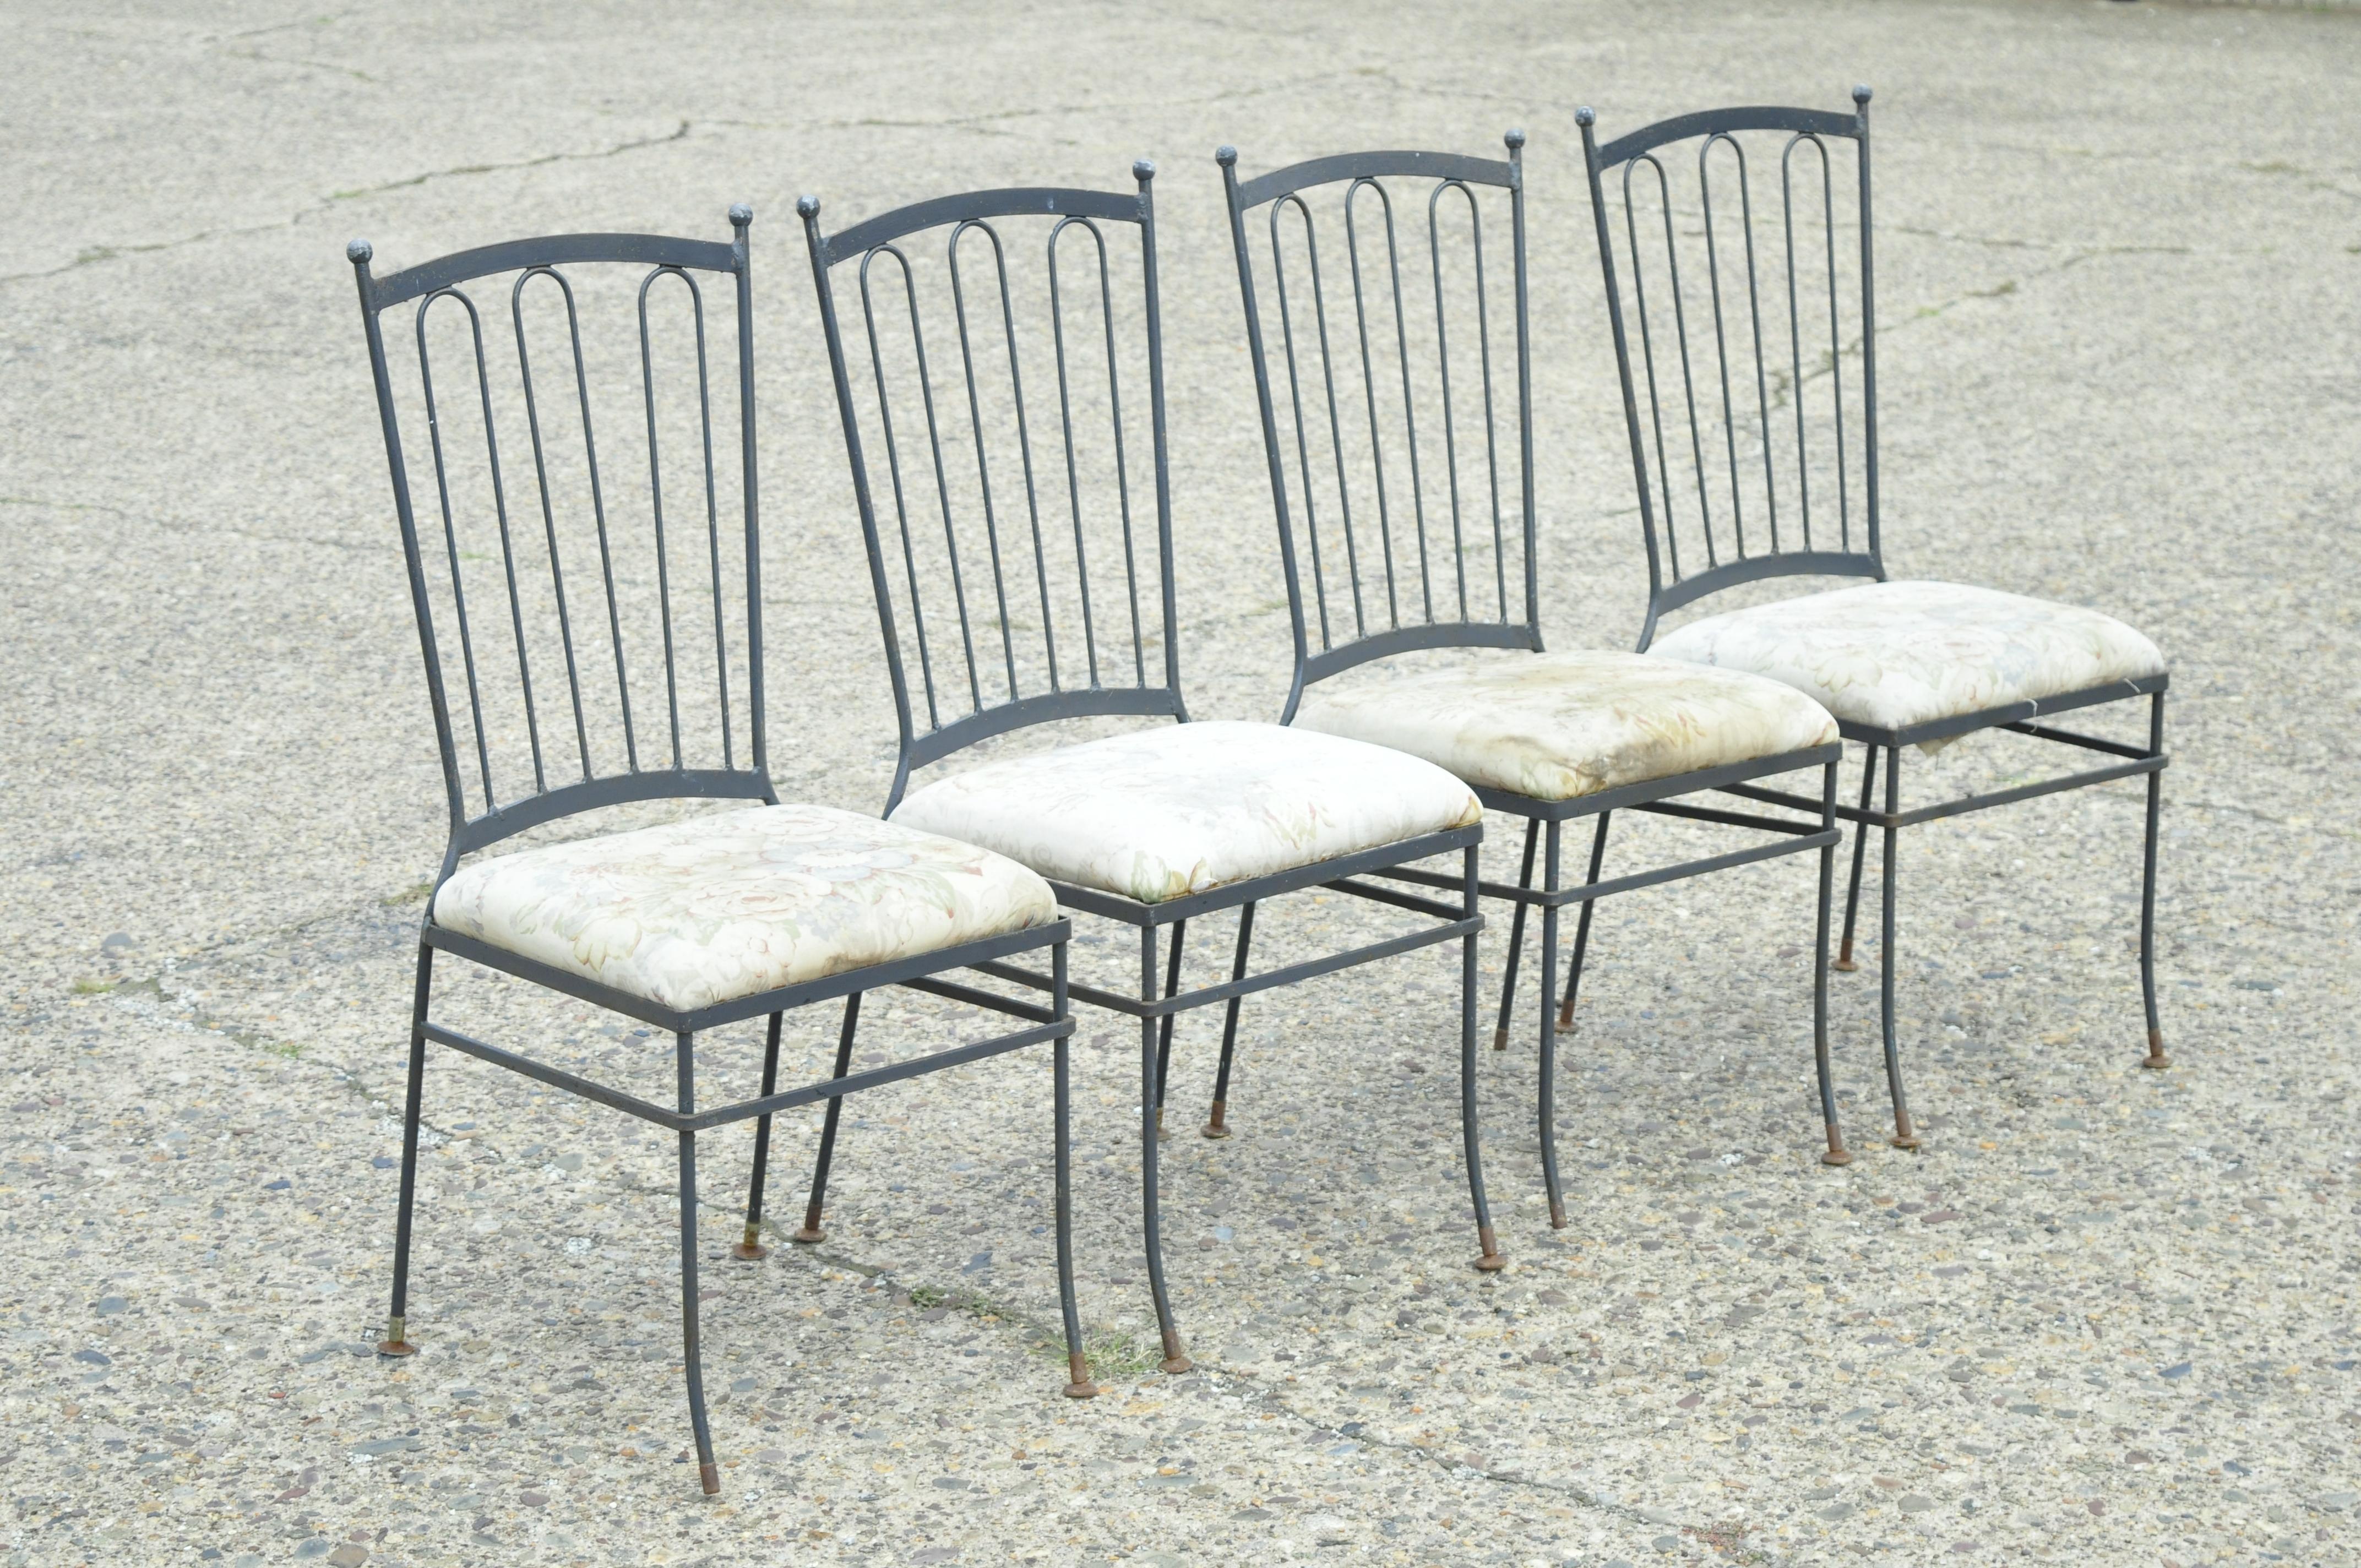 Vintage Mid Century Modern Italian Style wrought iron patio dining chairs - Set of 4. Set includes (4) side chairs, ball form finials, wrought iron construction, very nice vintage set, quality craftsmanship, sleek sculptural form. In the style and